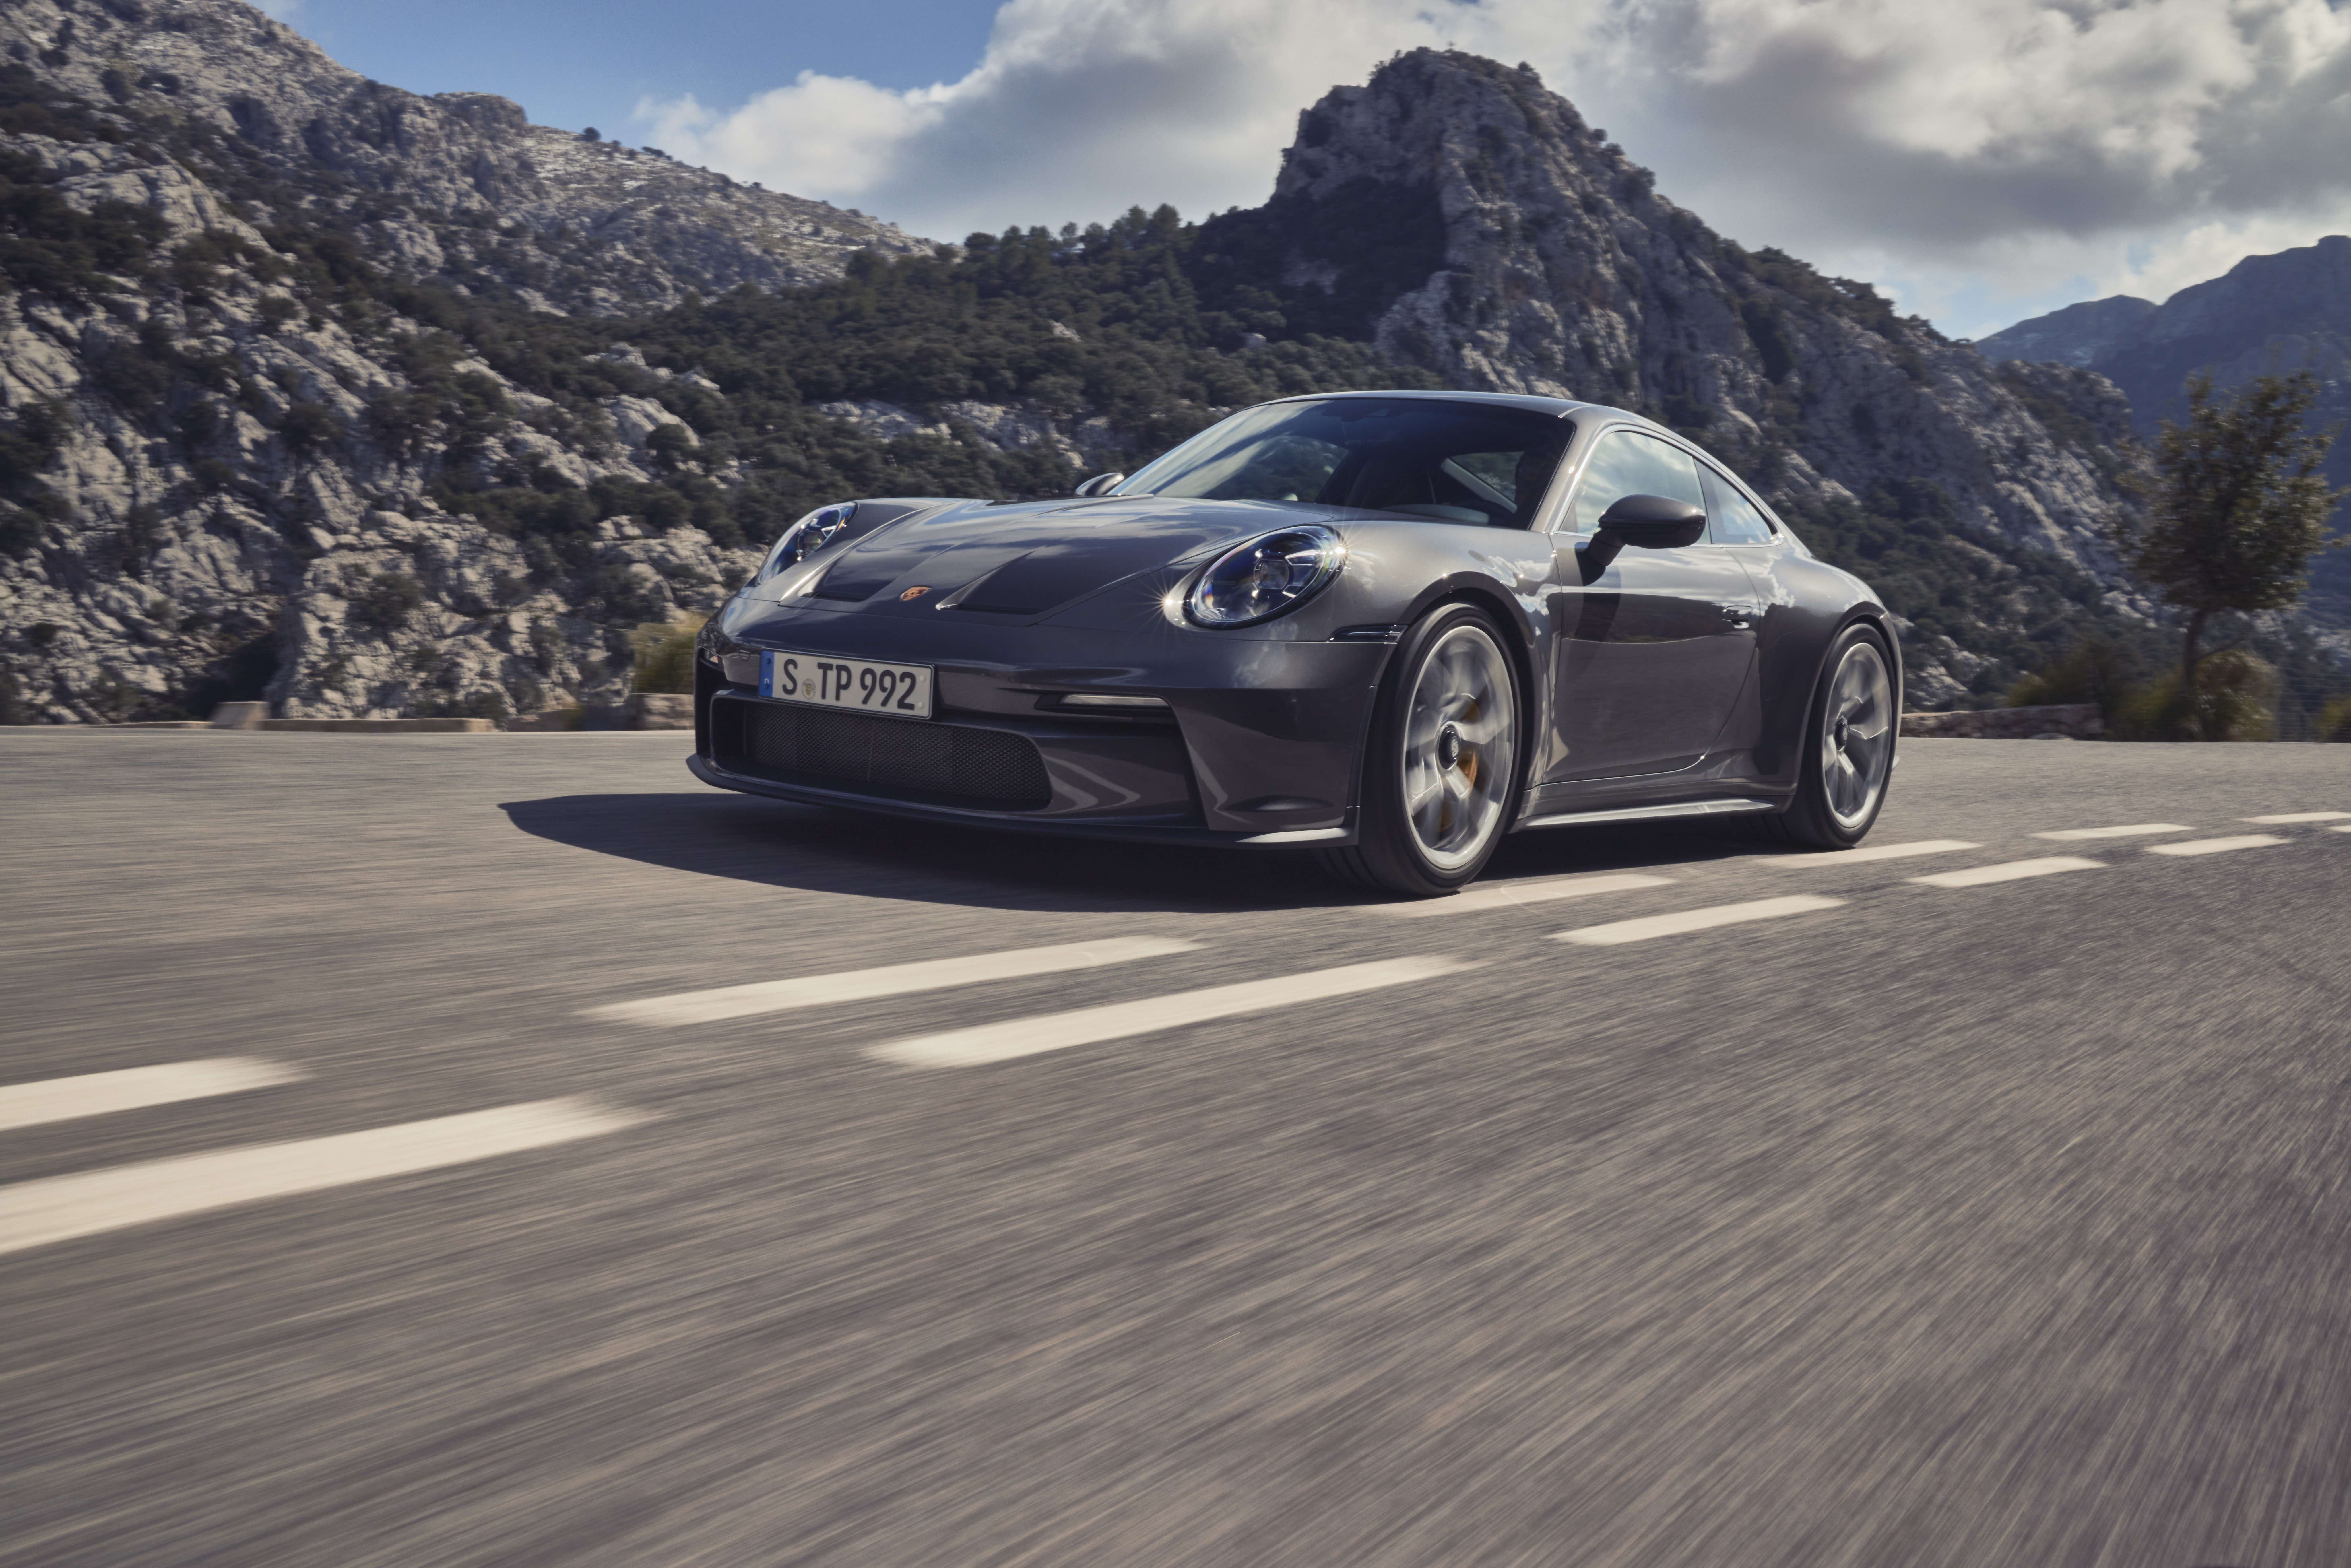 Dark grey 911 GT3 with Touring Package on roads, mountains behind